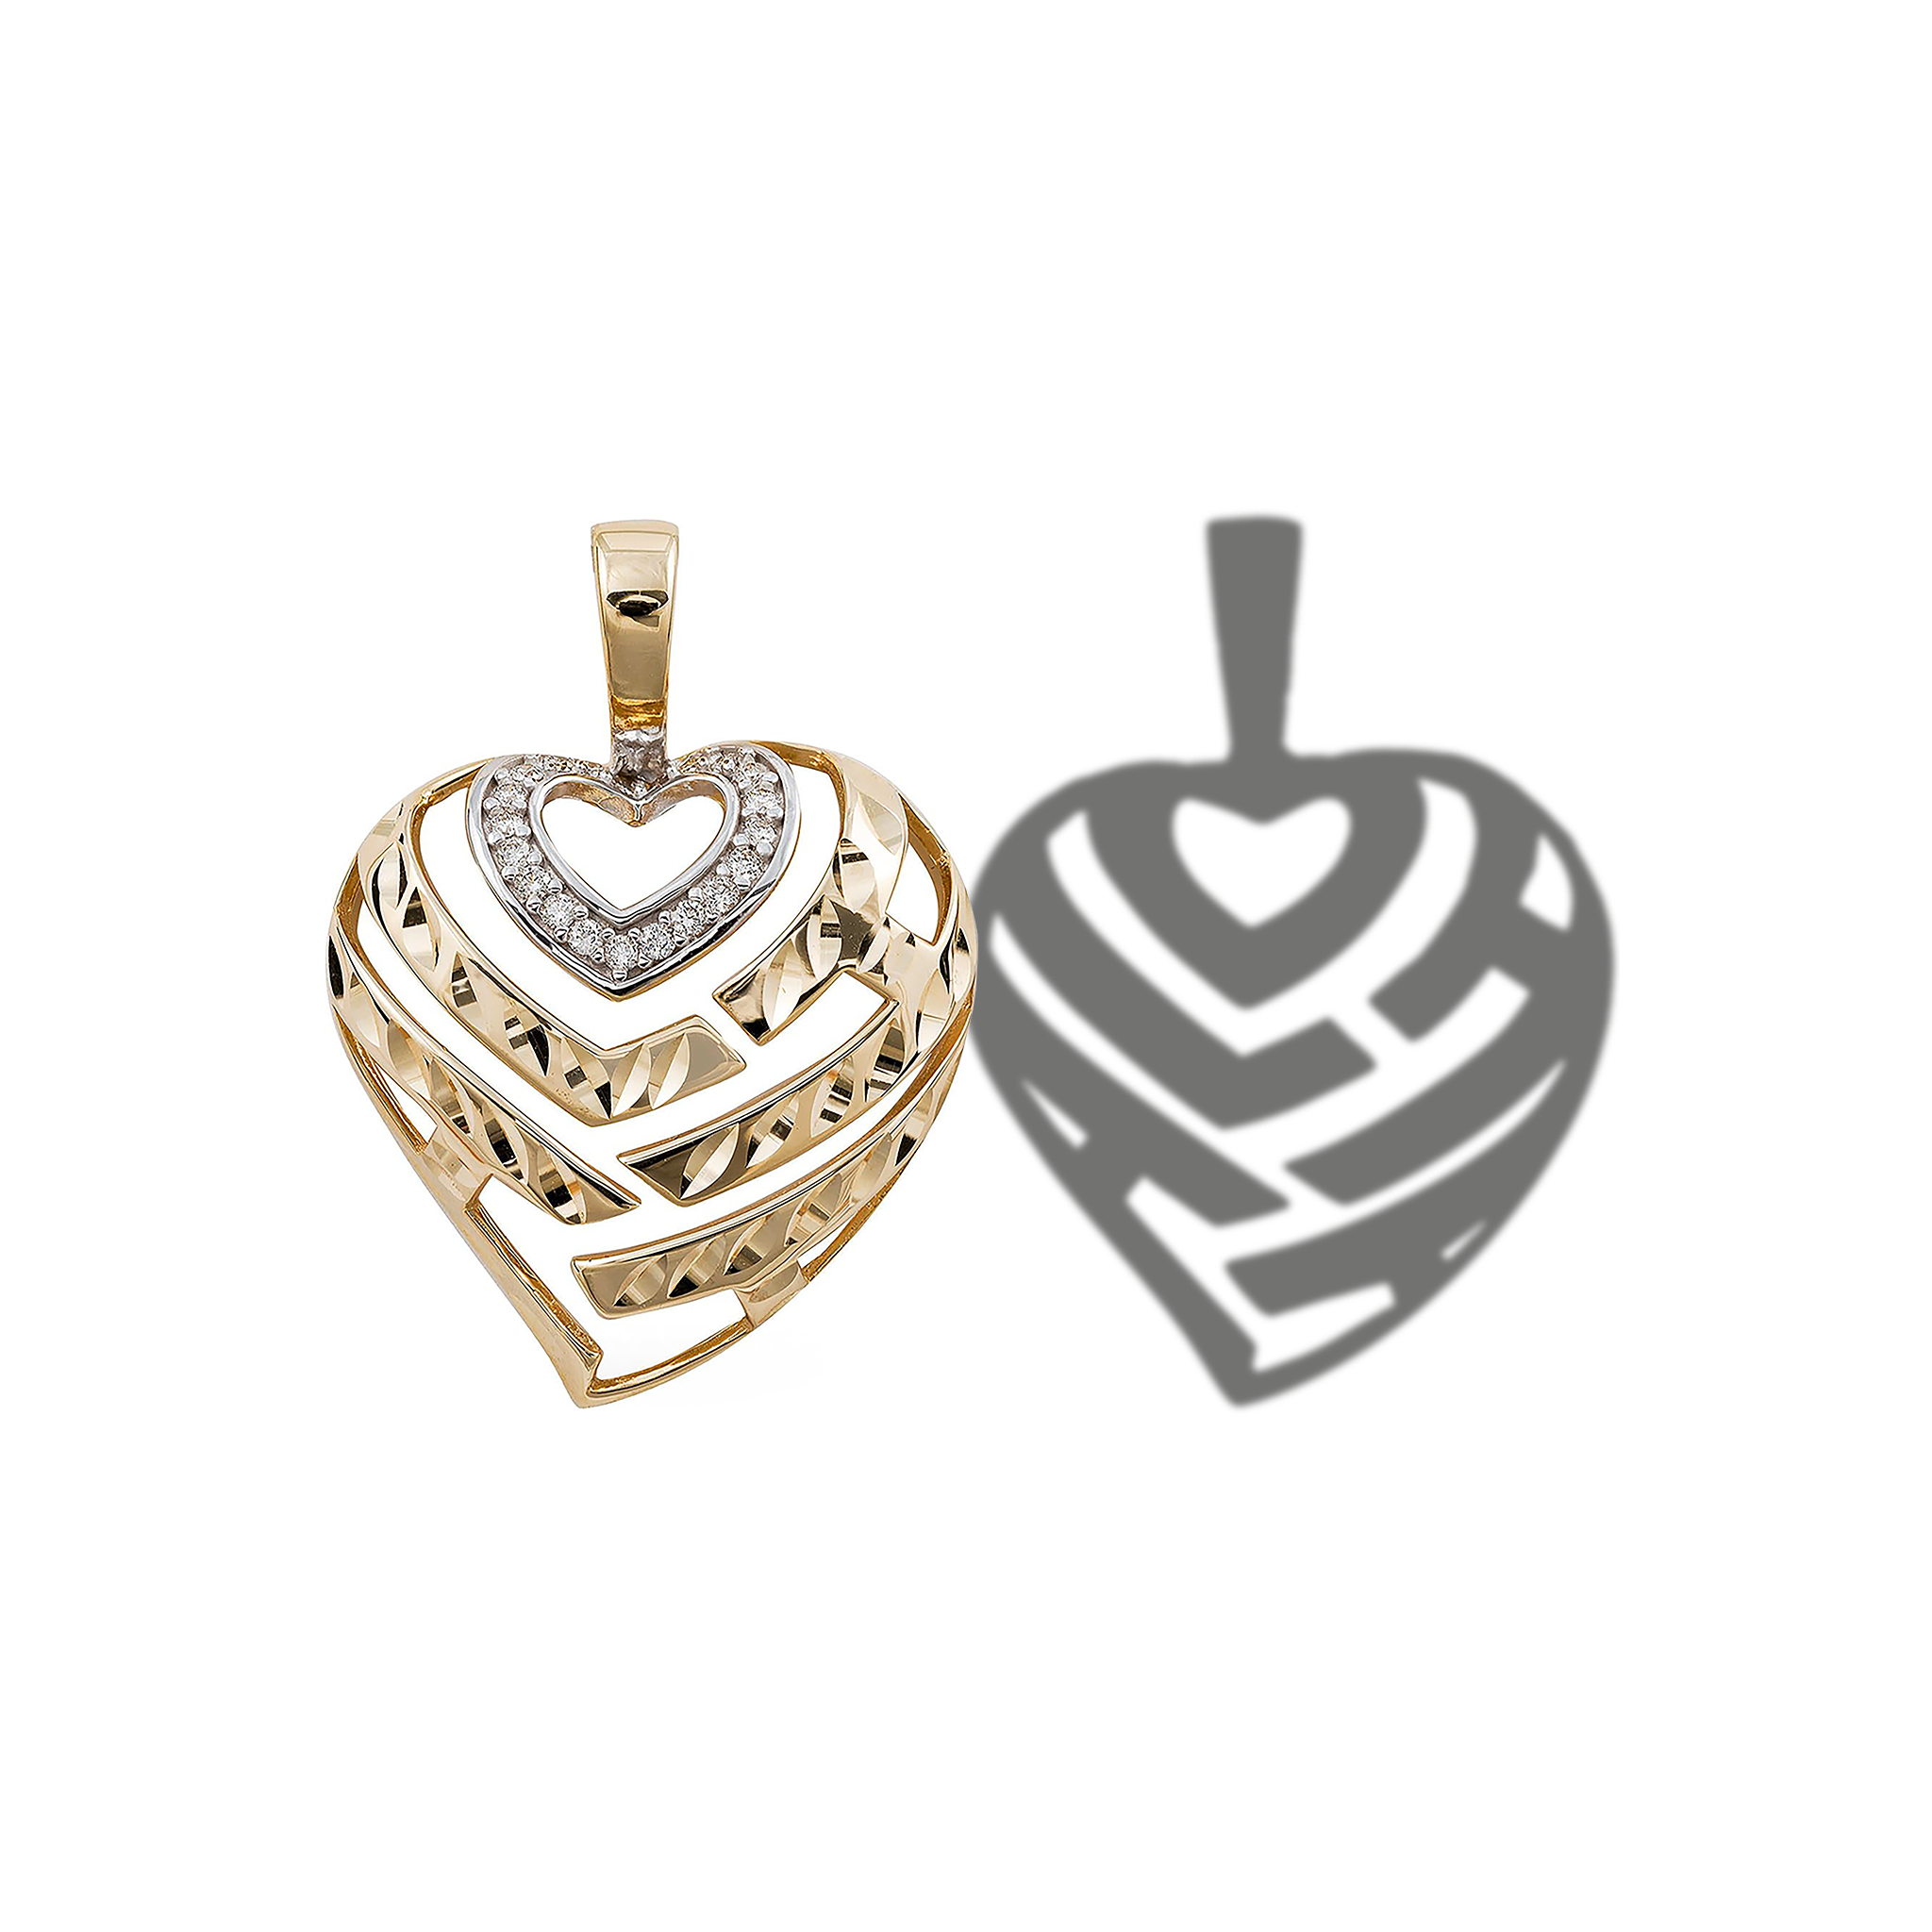 Aloha Heart Pendant in Gold with Diamonds - 18mm